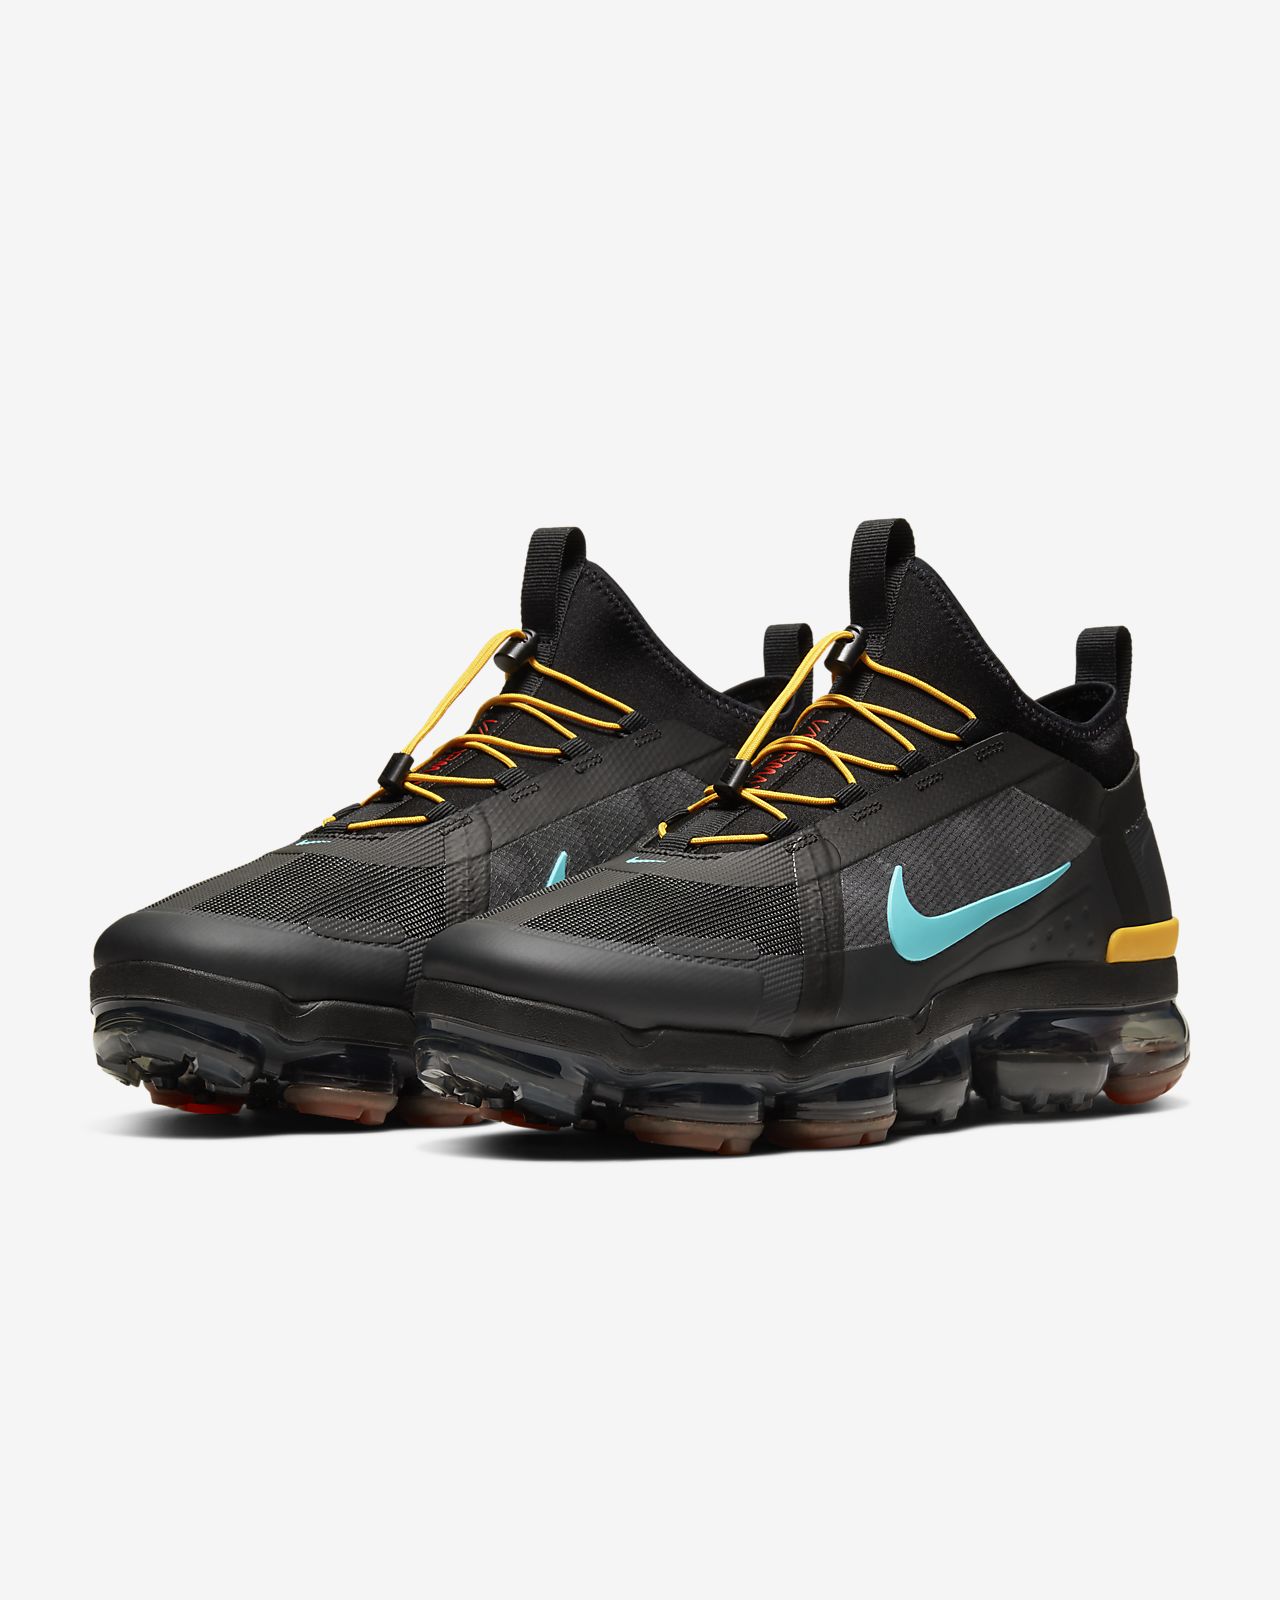 Nike Air VaporMax Plus Wolf GrayNoirBlanche 924453 007